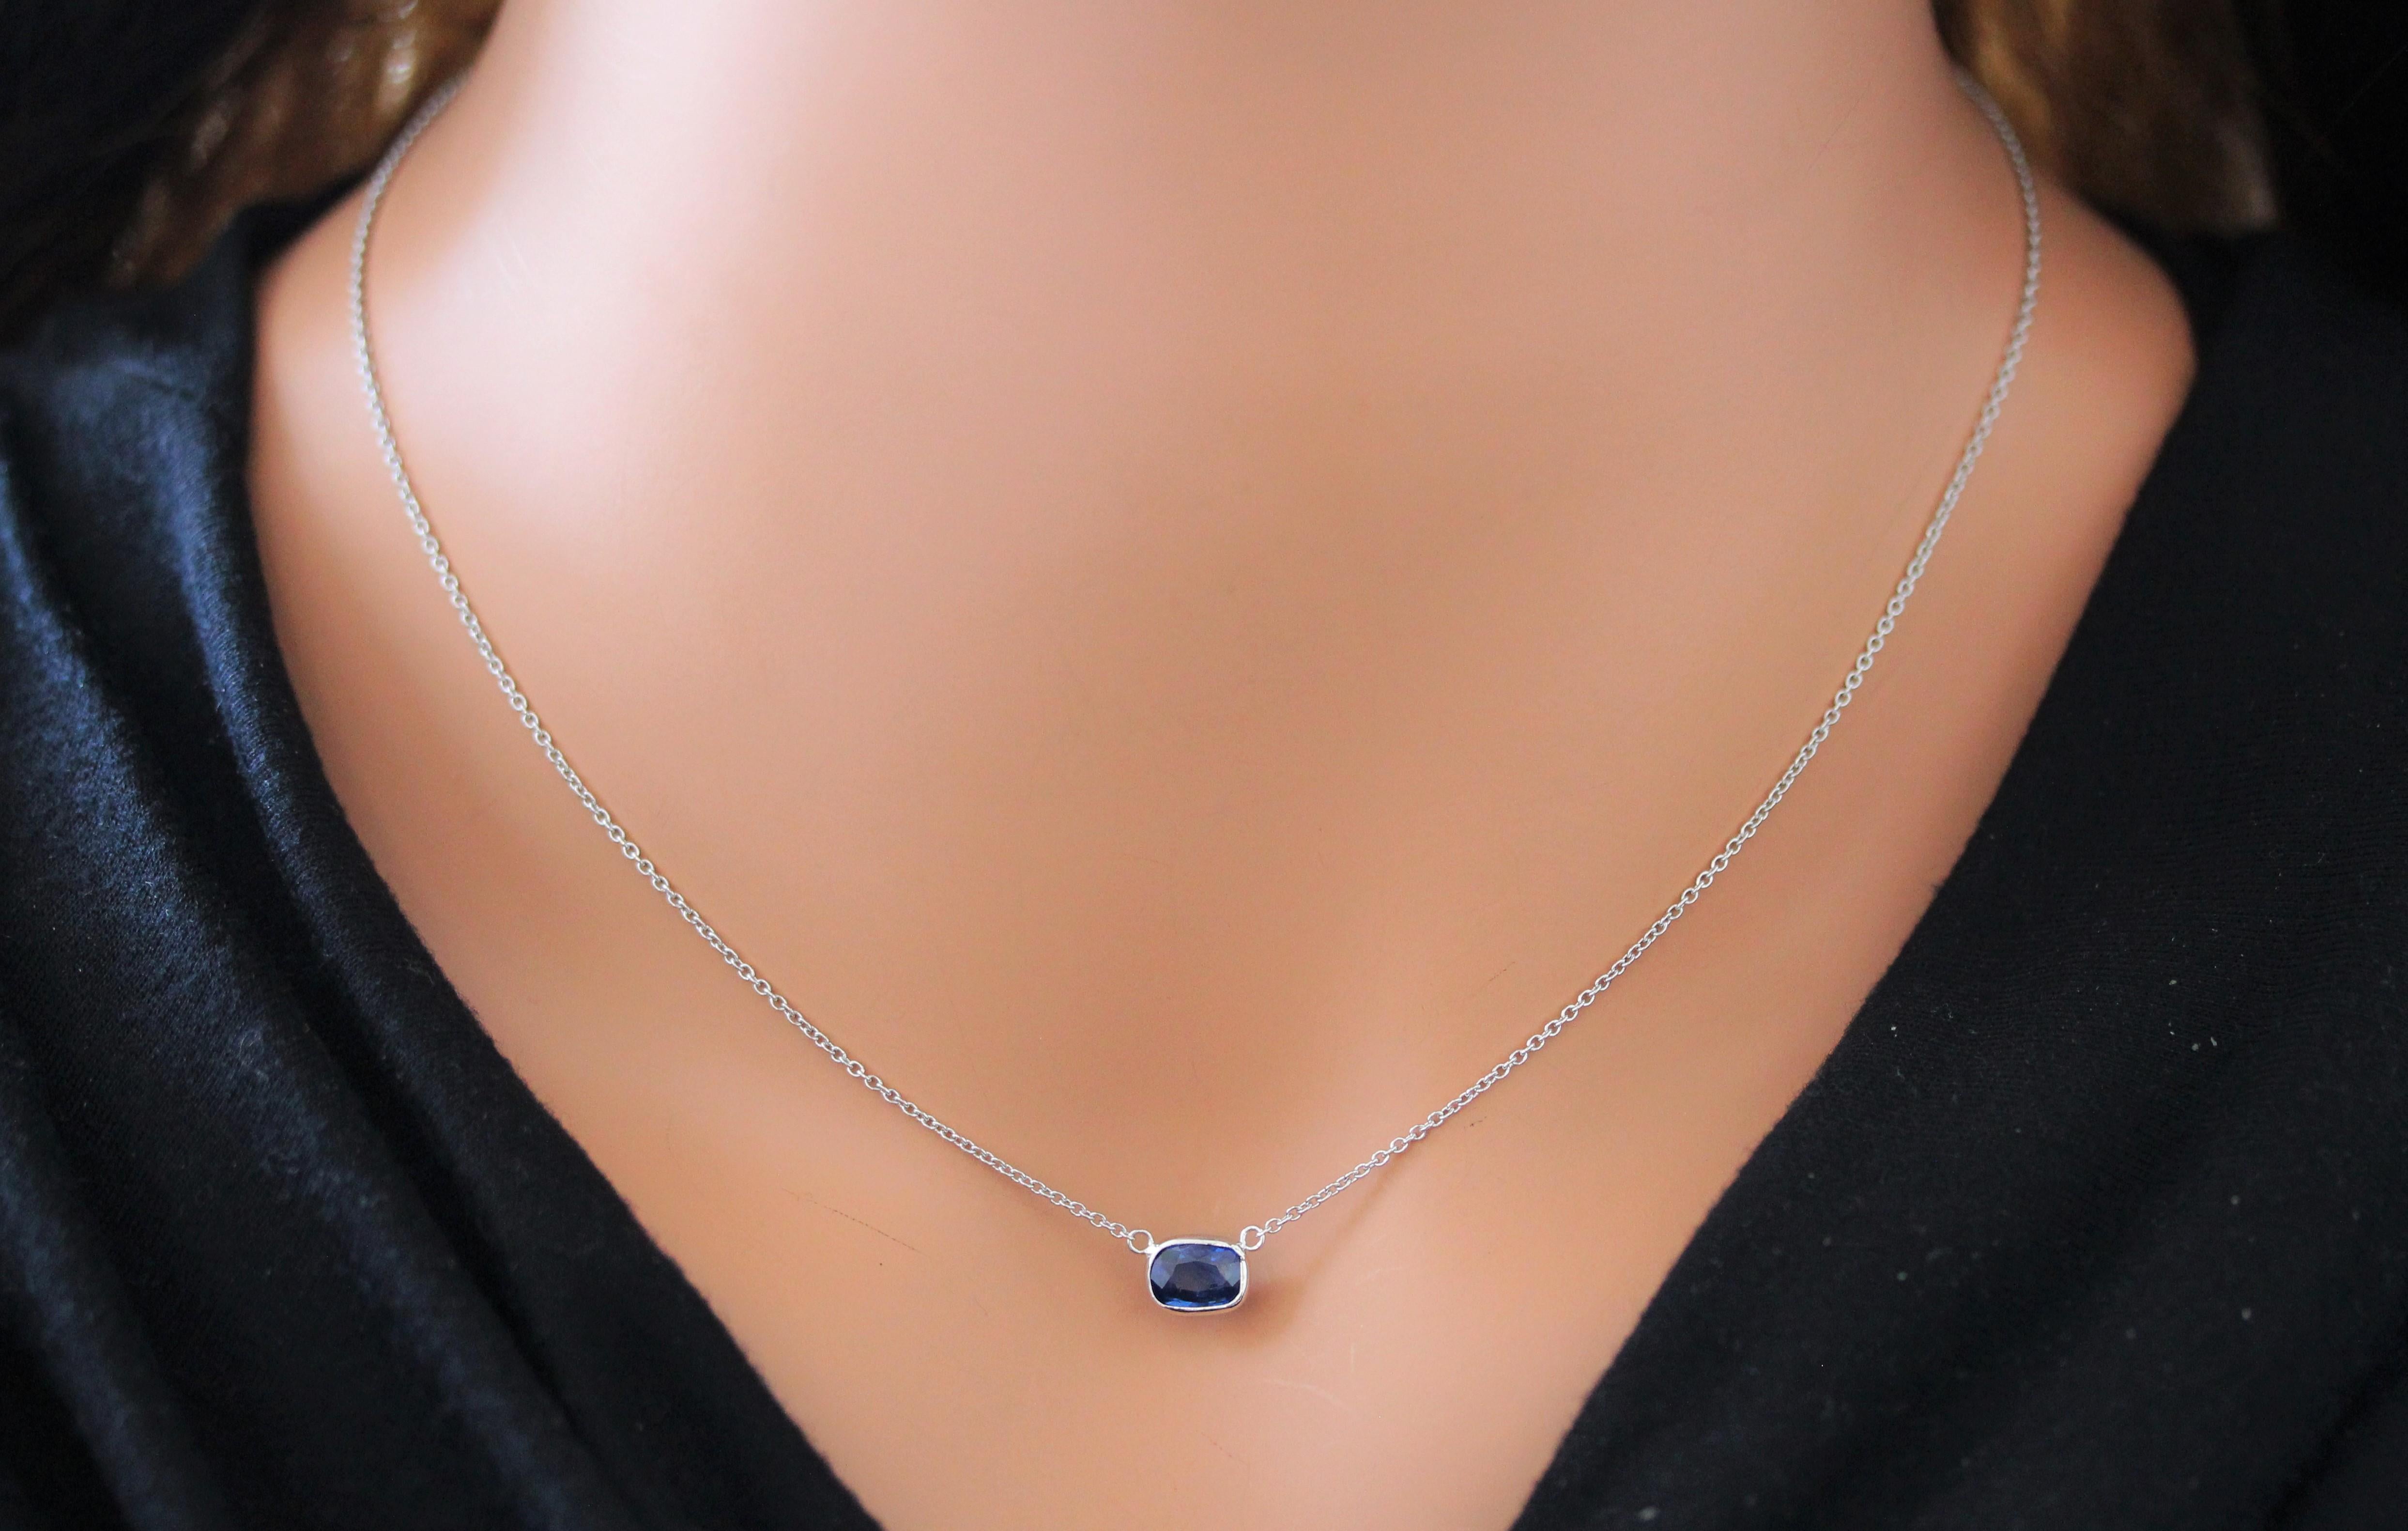 Contemporary 1.56 Carat Cushion Sapphire Blue Fashion Necklaces In 14k White Gold For Sale